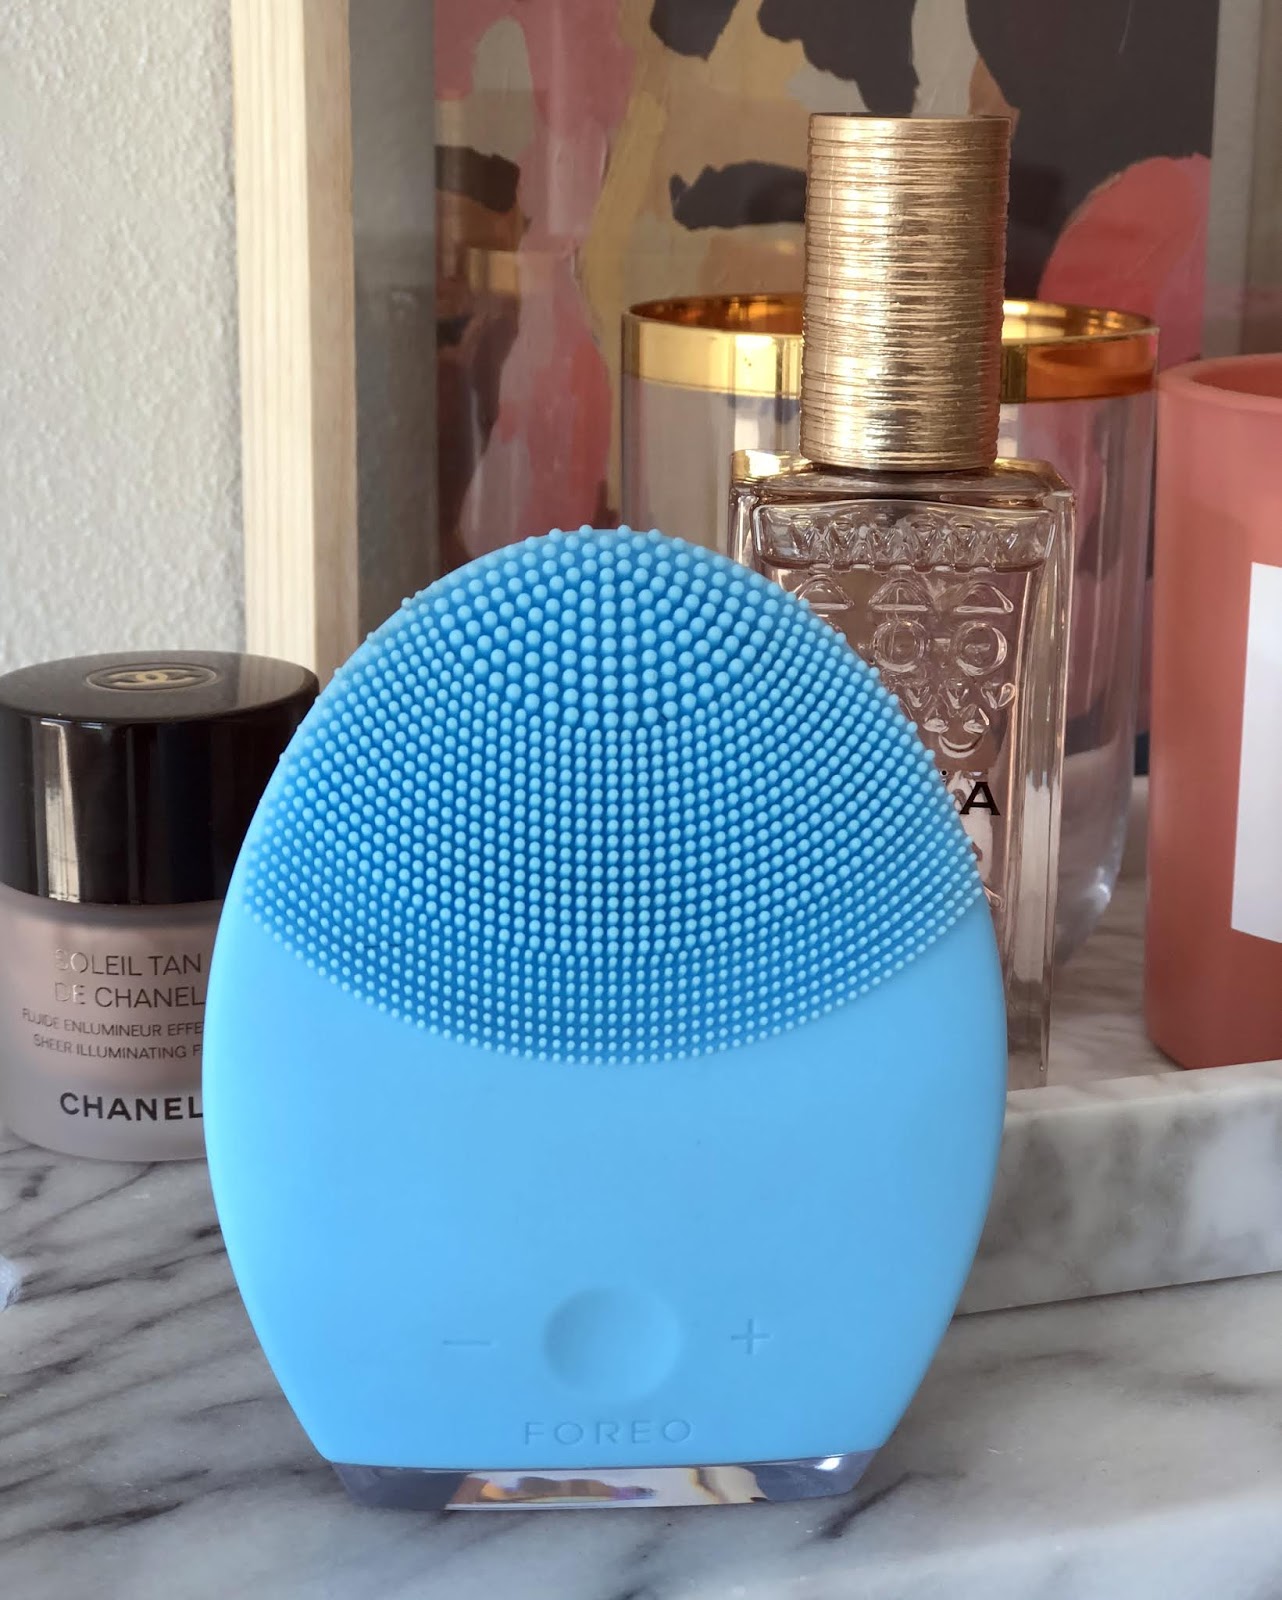 FOREO LUNA 2: MY REVIEW - Kiss Blush & Tell - Skincare and Beauty Blog